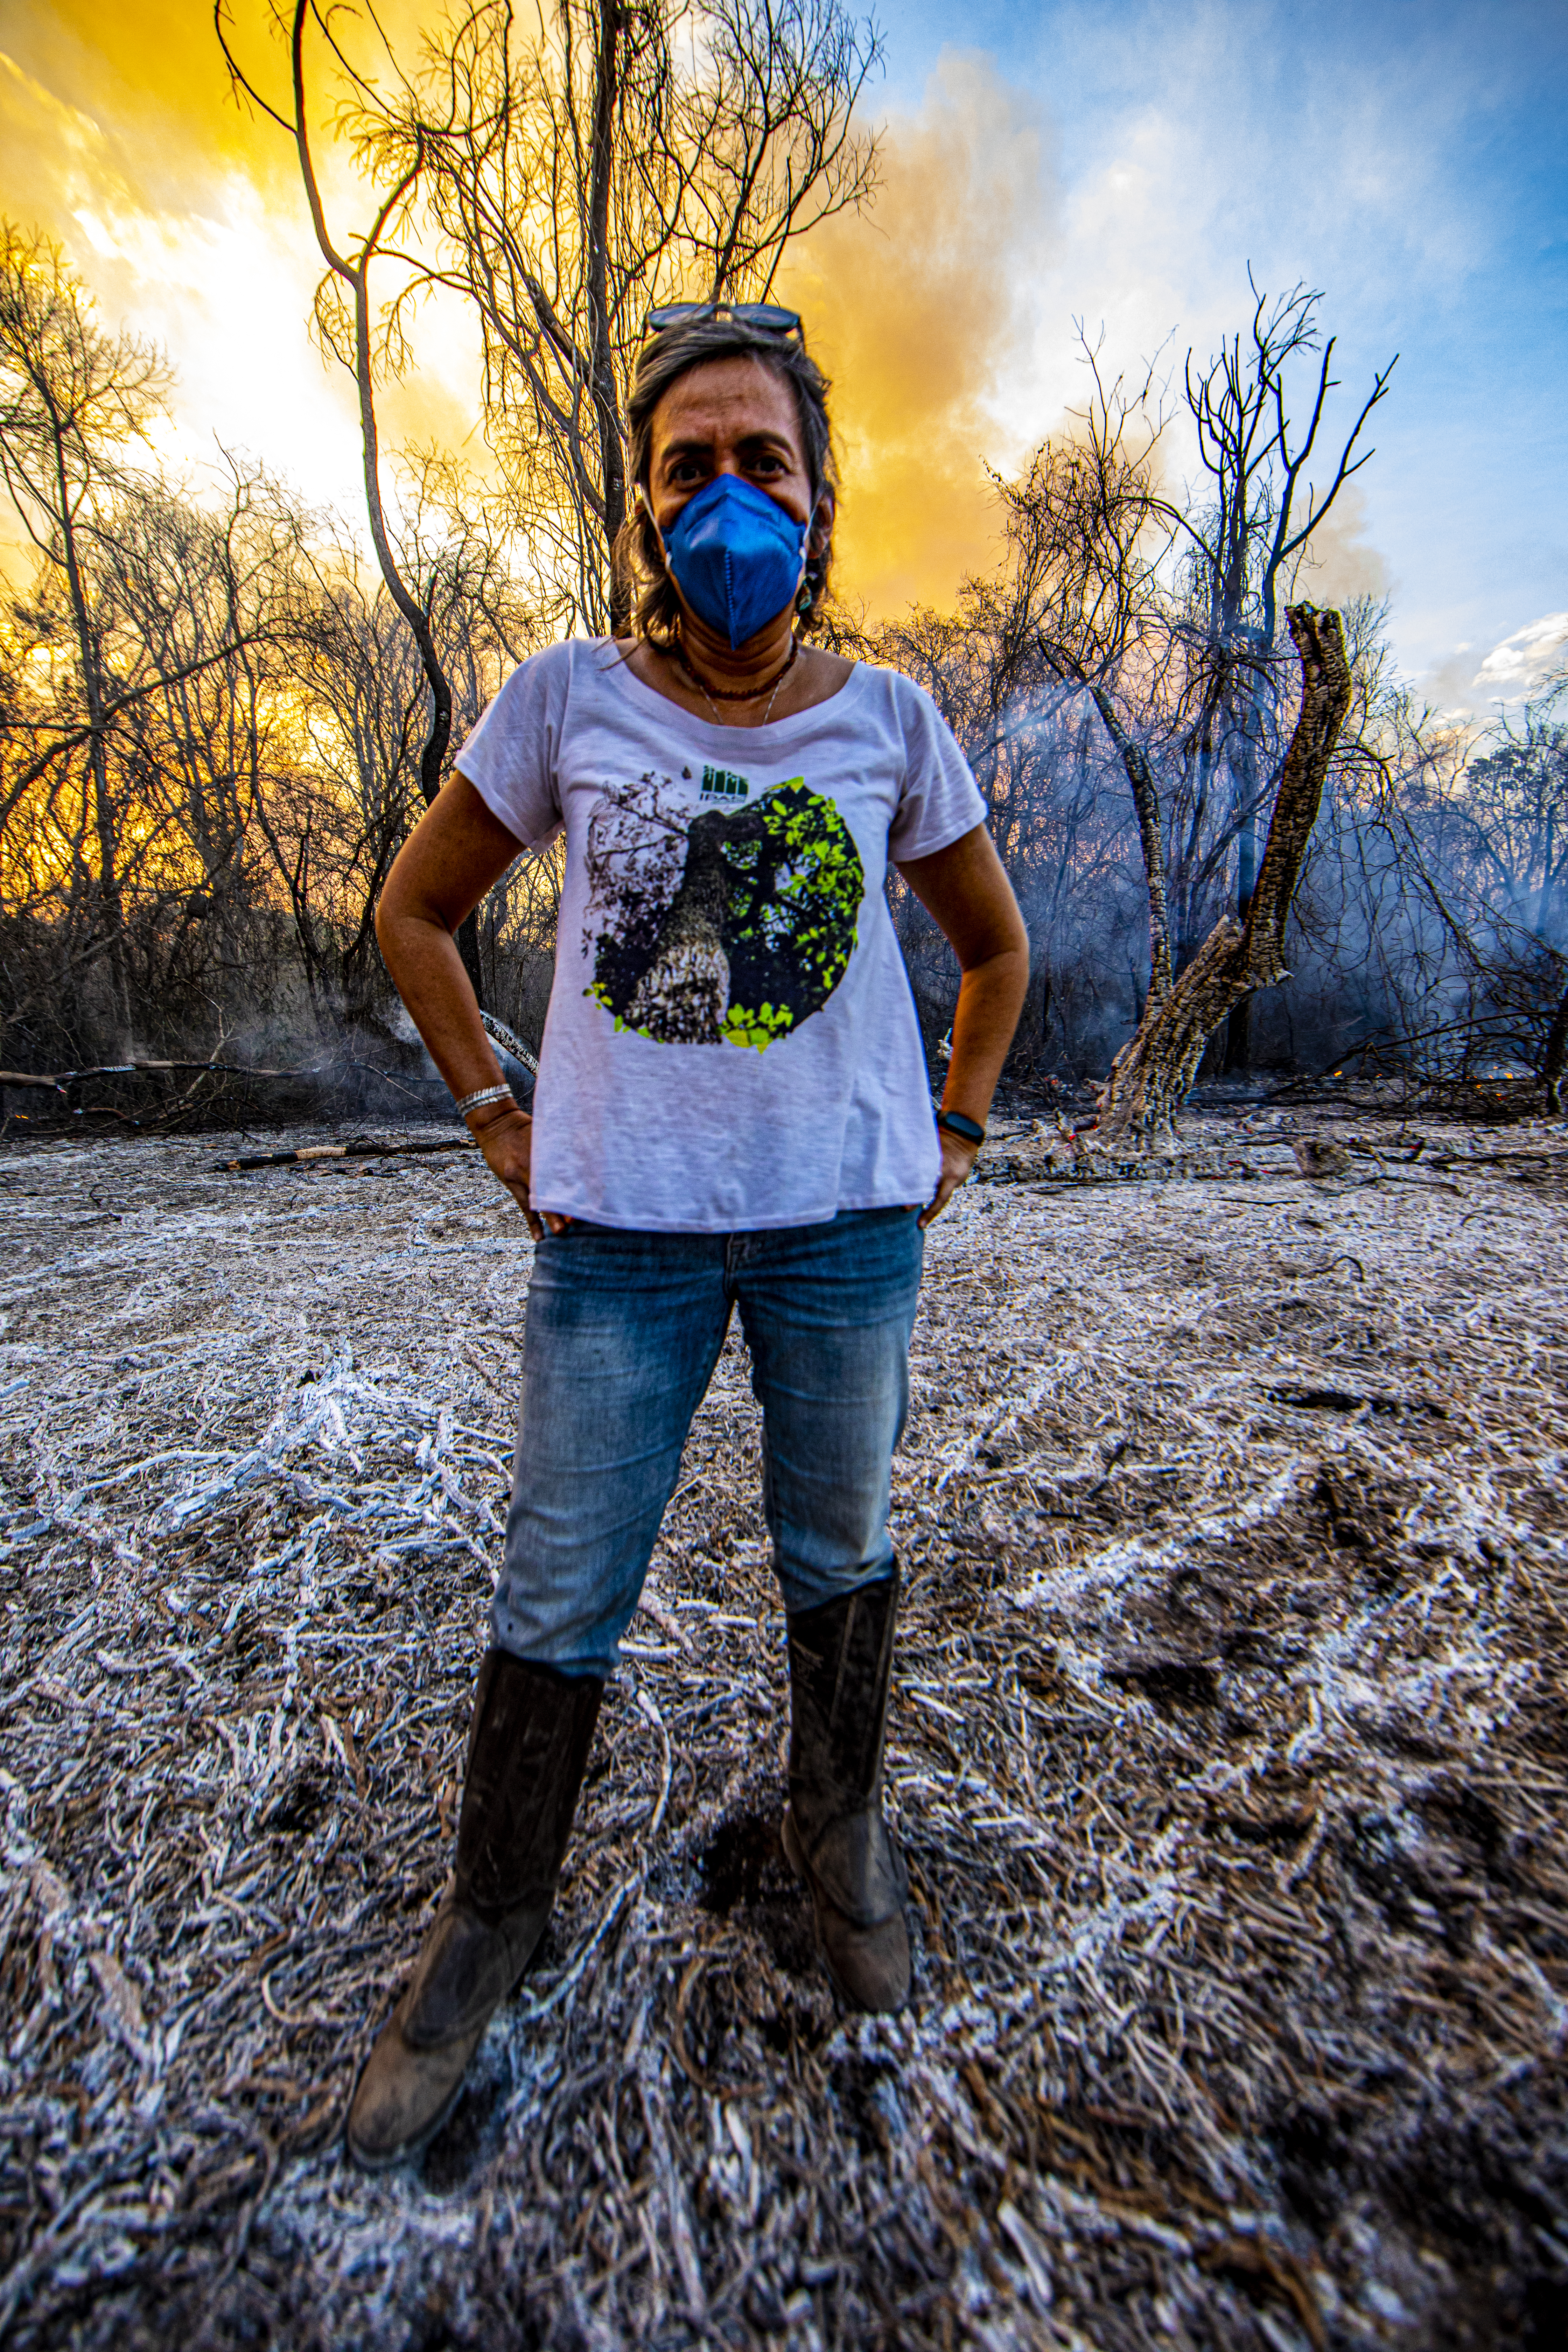 A woman in jeans and a t-shirt, sunglasses perched over her hair, and a mask on stands before charred looking tree skeletons that are silhouetted against a giant blare of orange-white fire right behind her, the flames going up past the edge of the picture